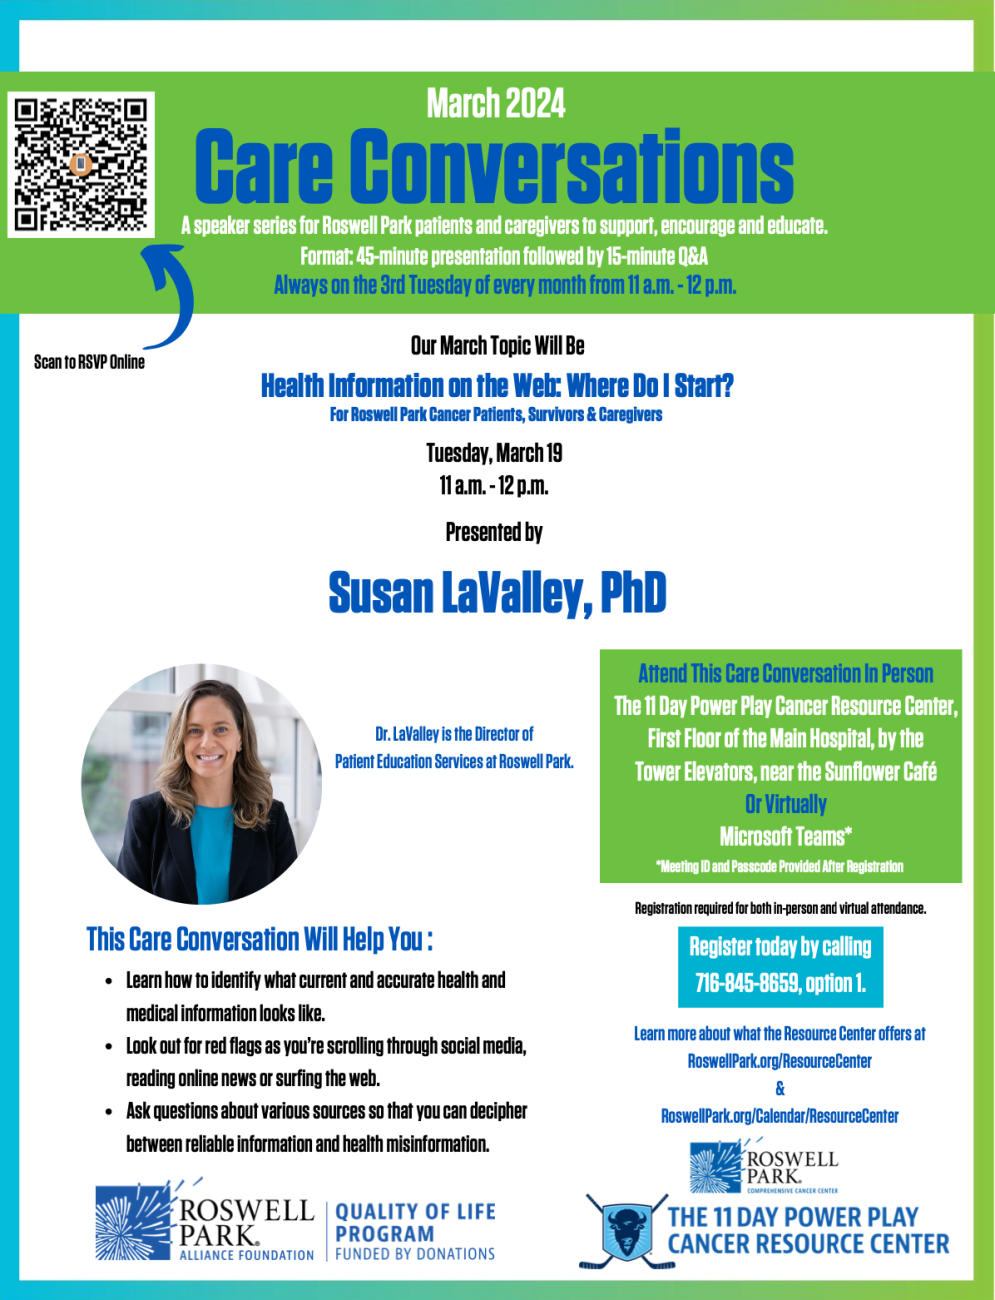 Poster for Care Conversations event about finding health information on the internet